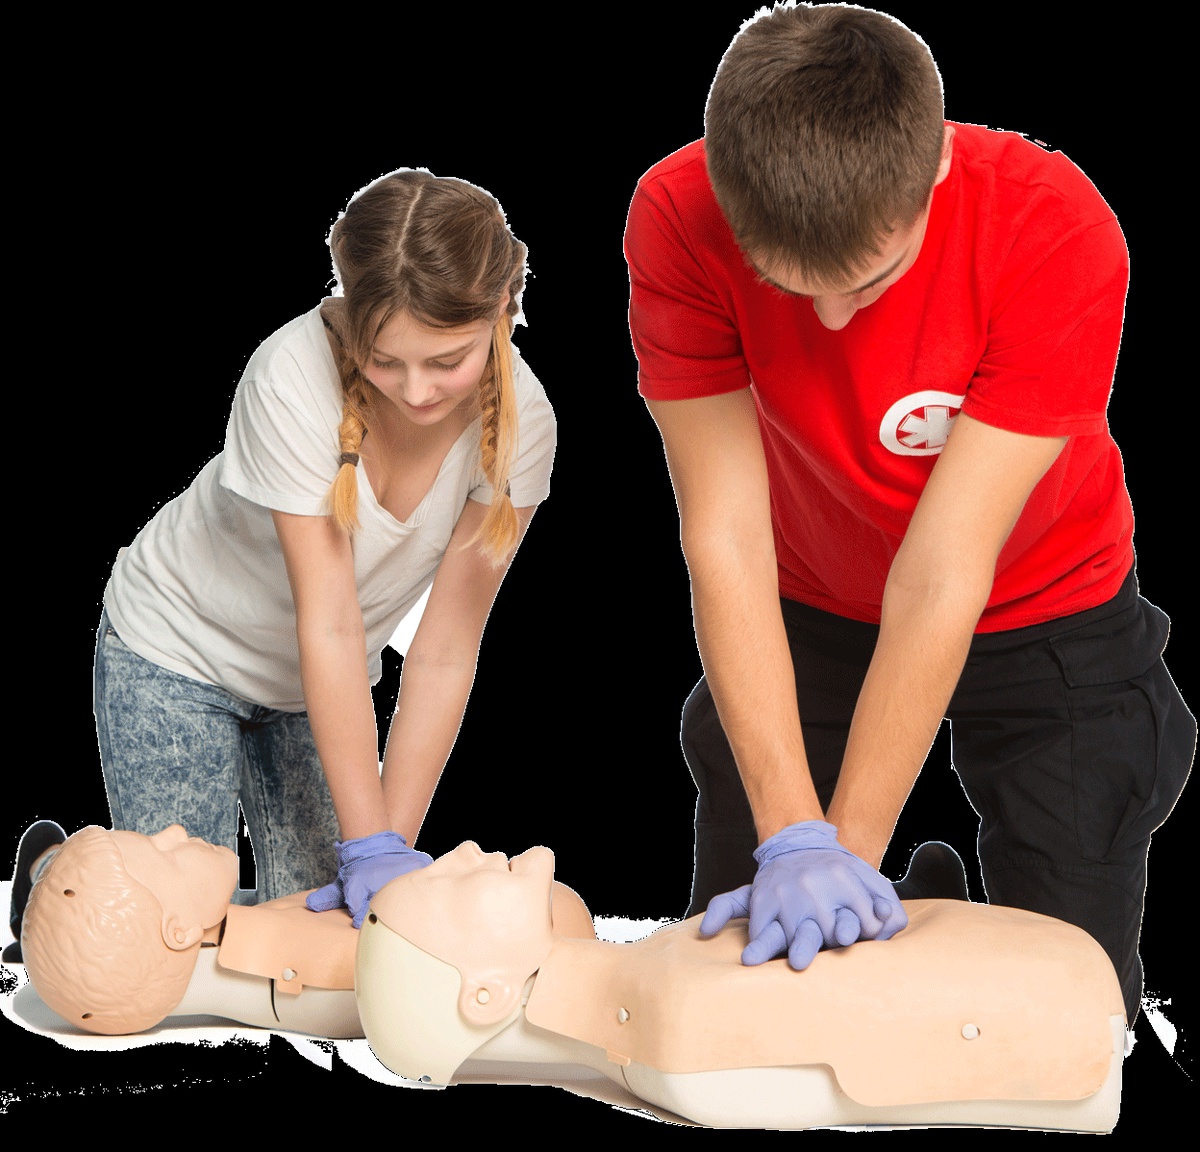 Why Is It Important To Render First Aid Training At Workplace